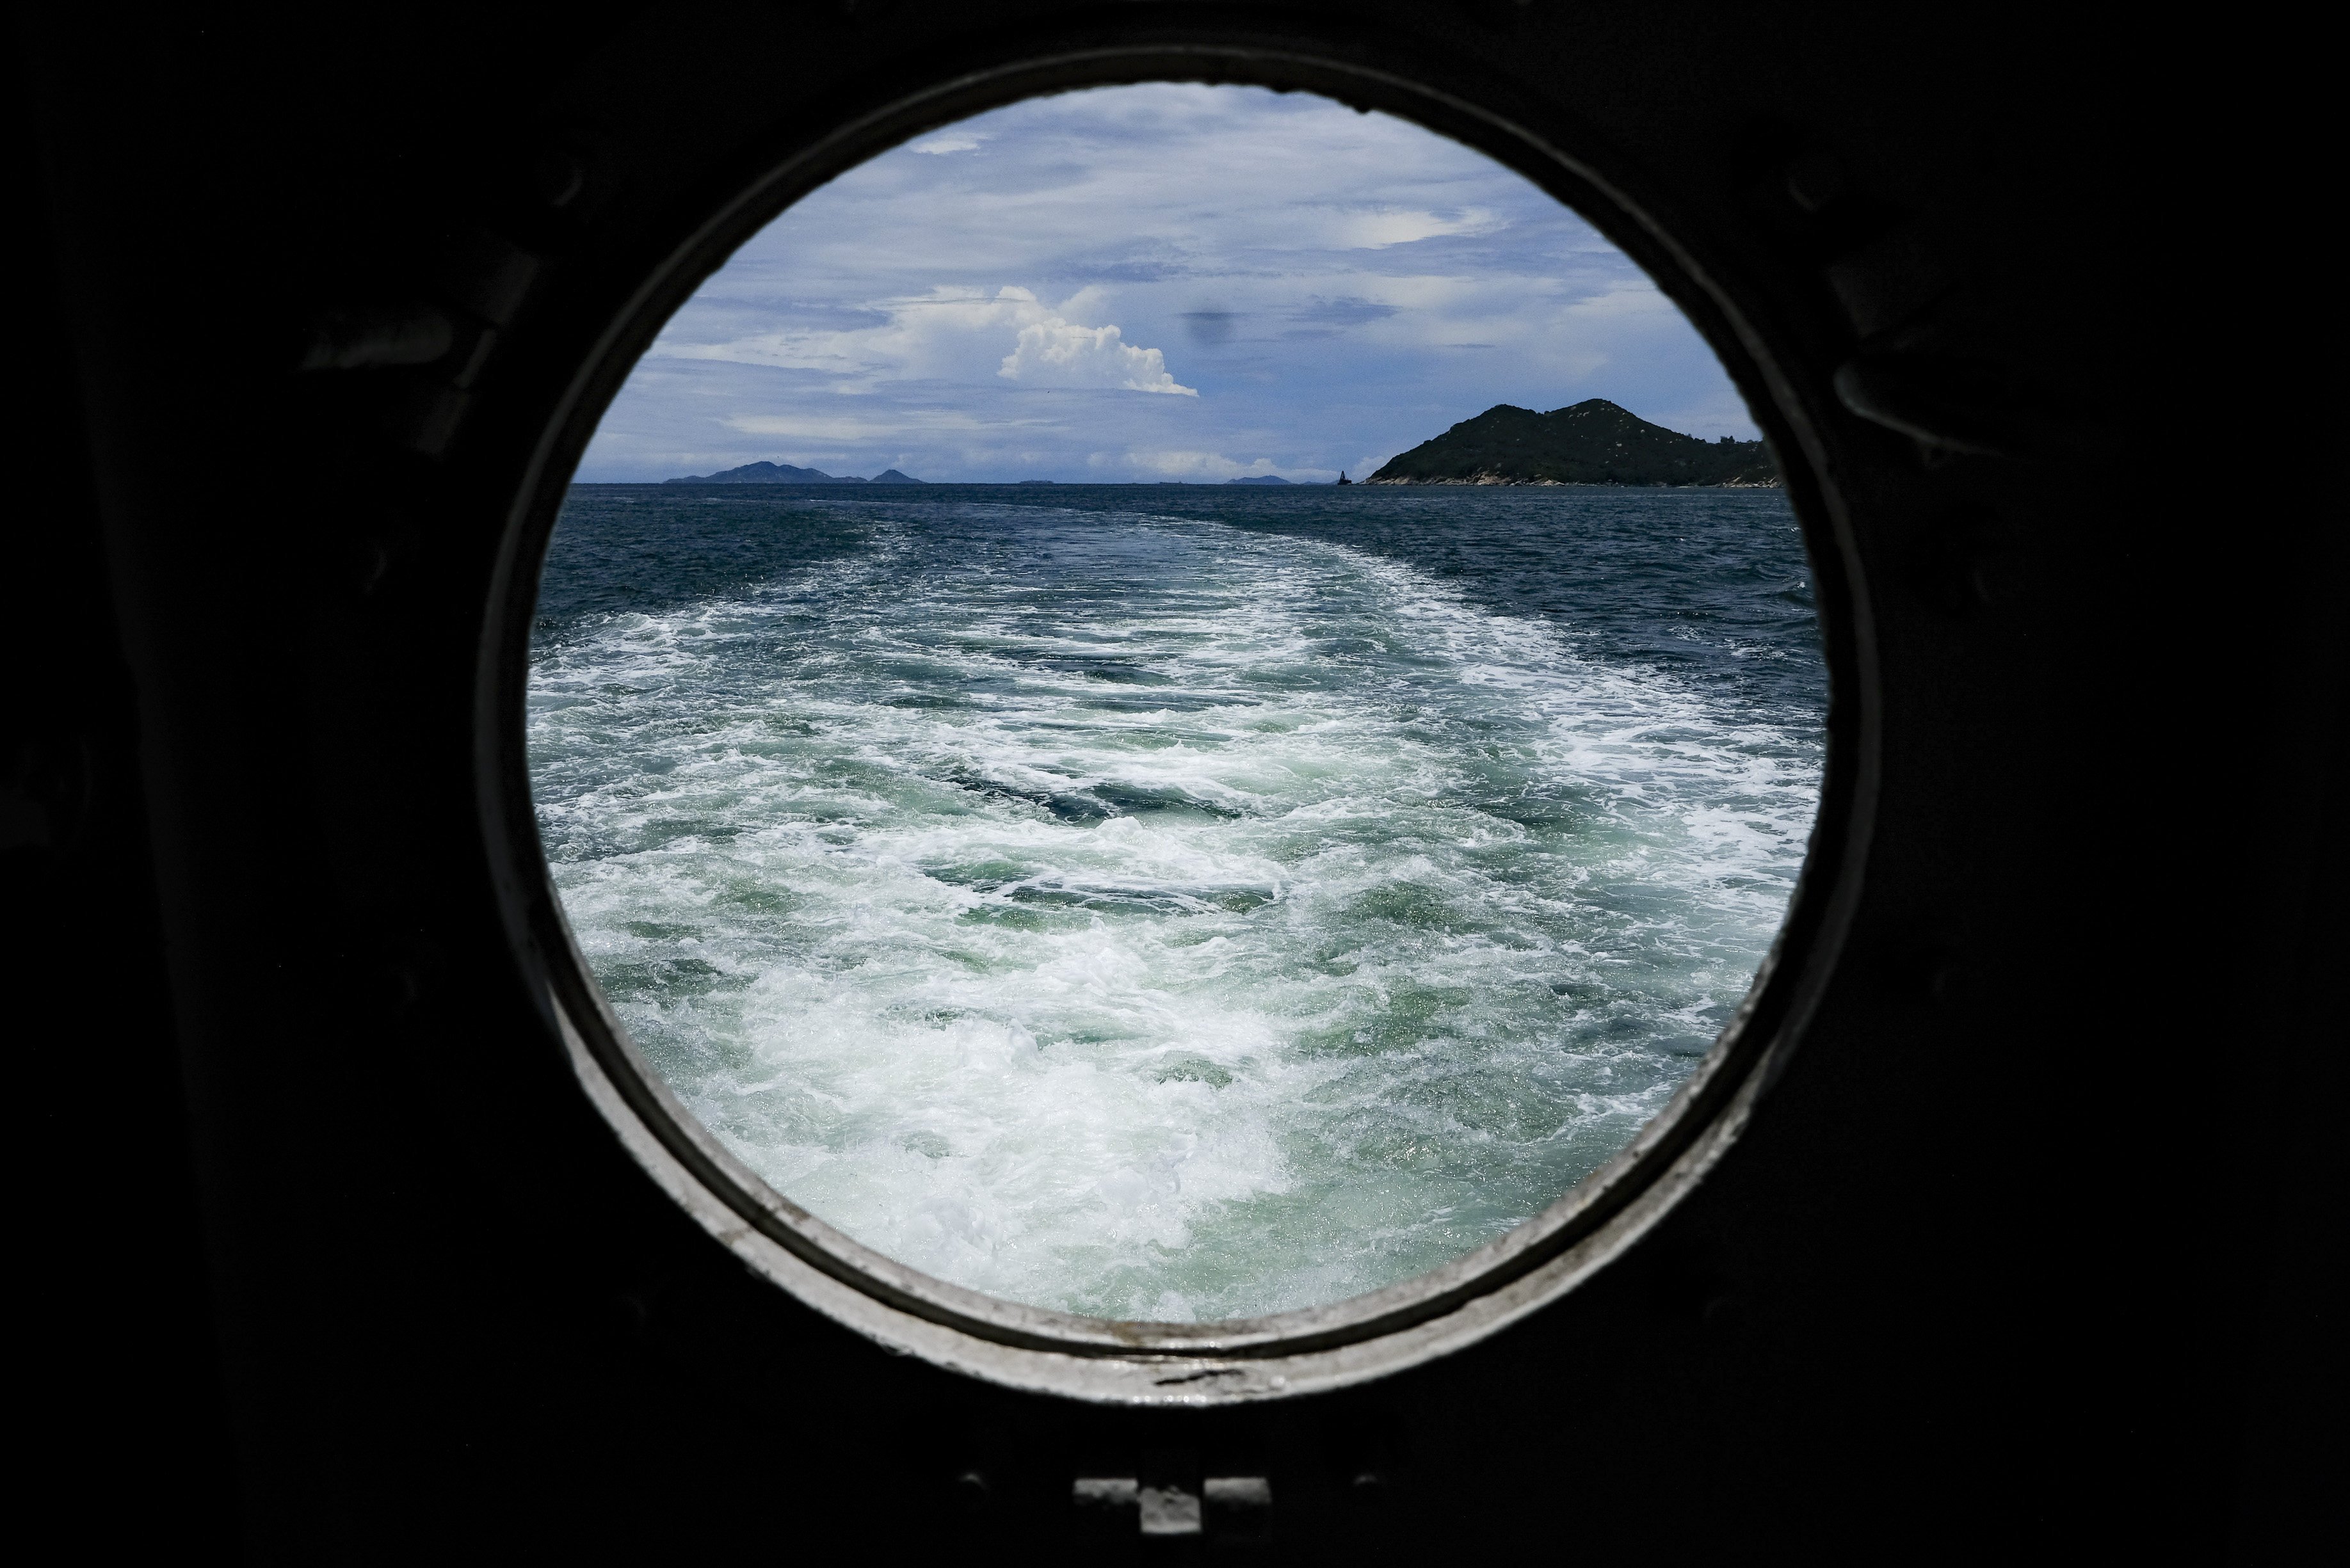 View from the toilet on the Ming River inter-islands ferry, or locally known as “kaito”, that commutes between Hong Kong’s outlying islands of Cheung Chau and Peng Chau, with stops at Mui Wo and briefly at Chi Ma Wan, several times a day.  30JUL20  SCMP / James Wendlinger  [FEATURES]